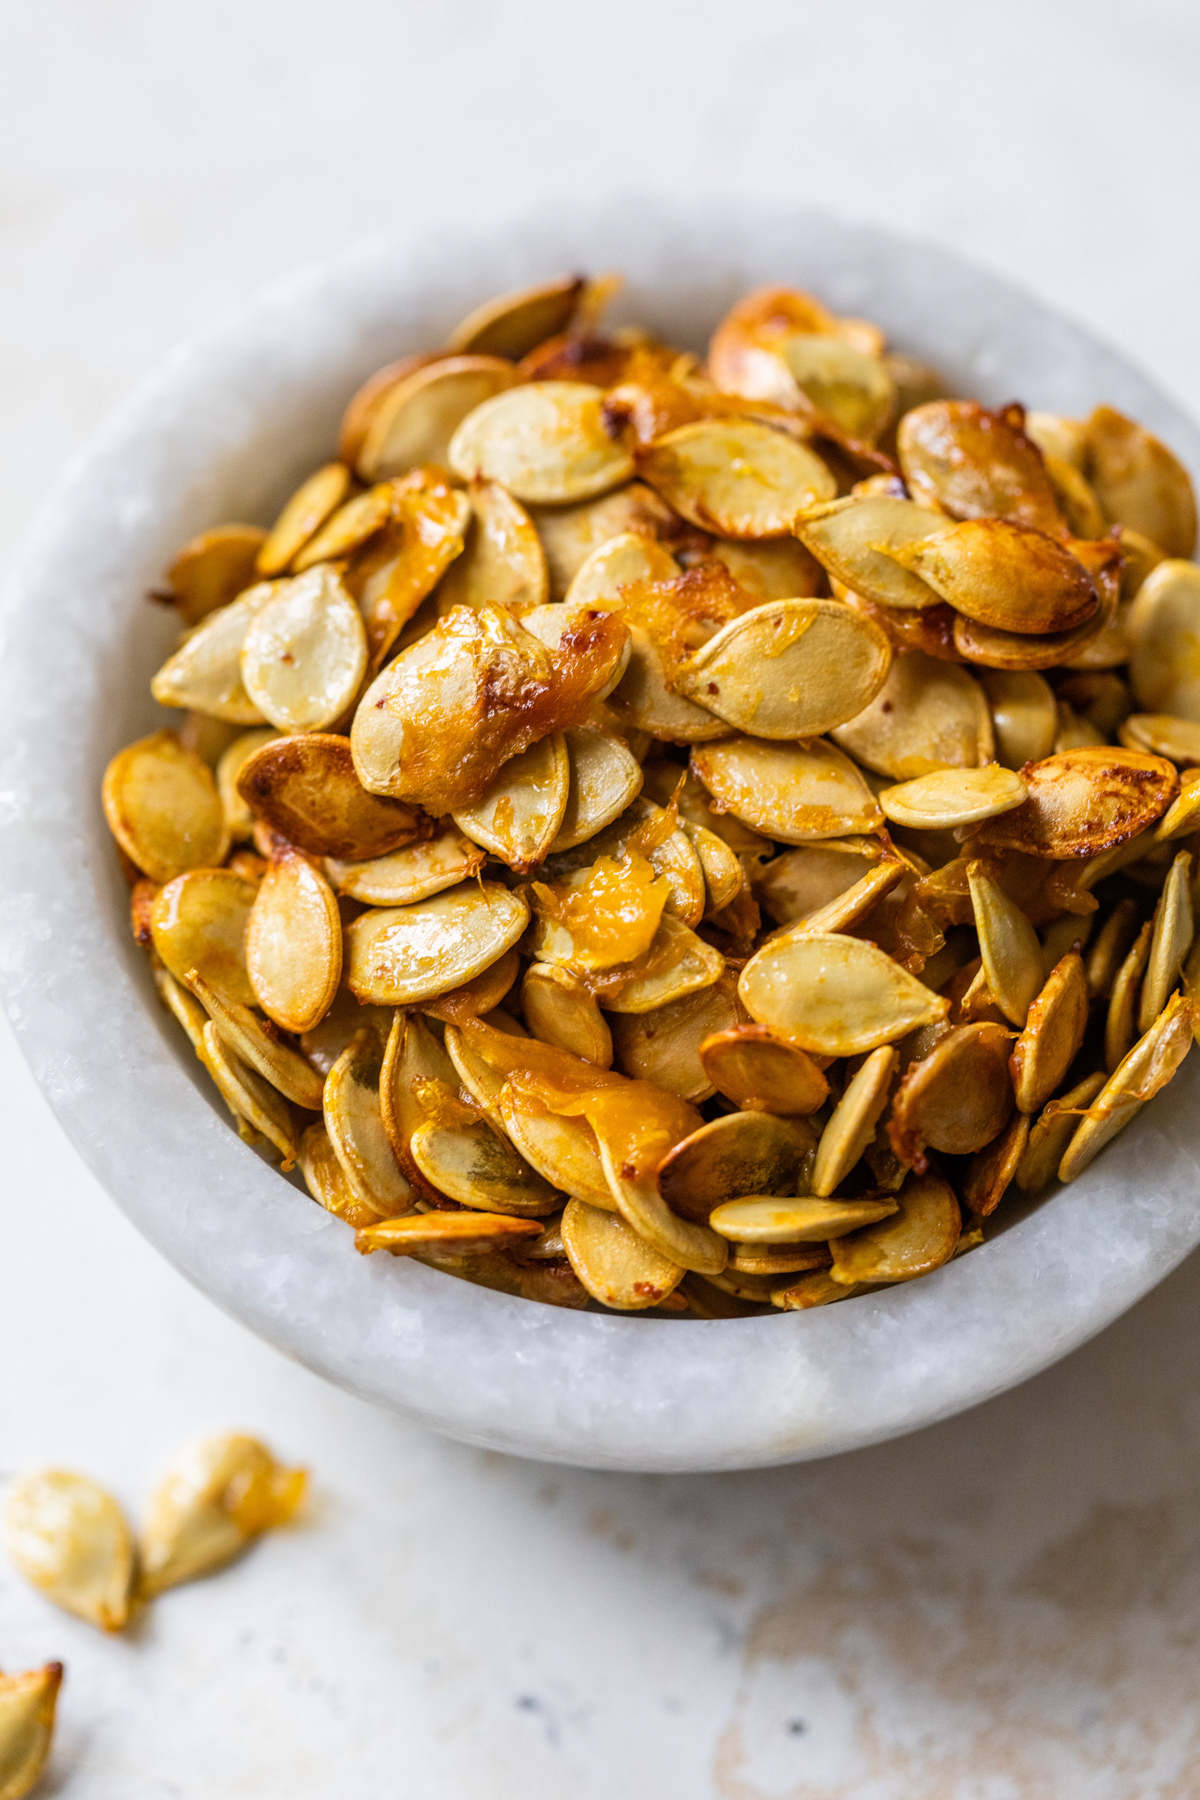 roasted and salted acorn squash seeds in a small white bowl